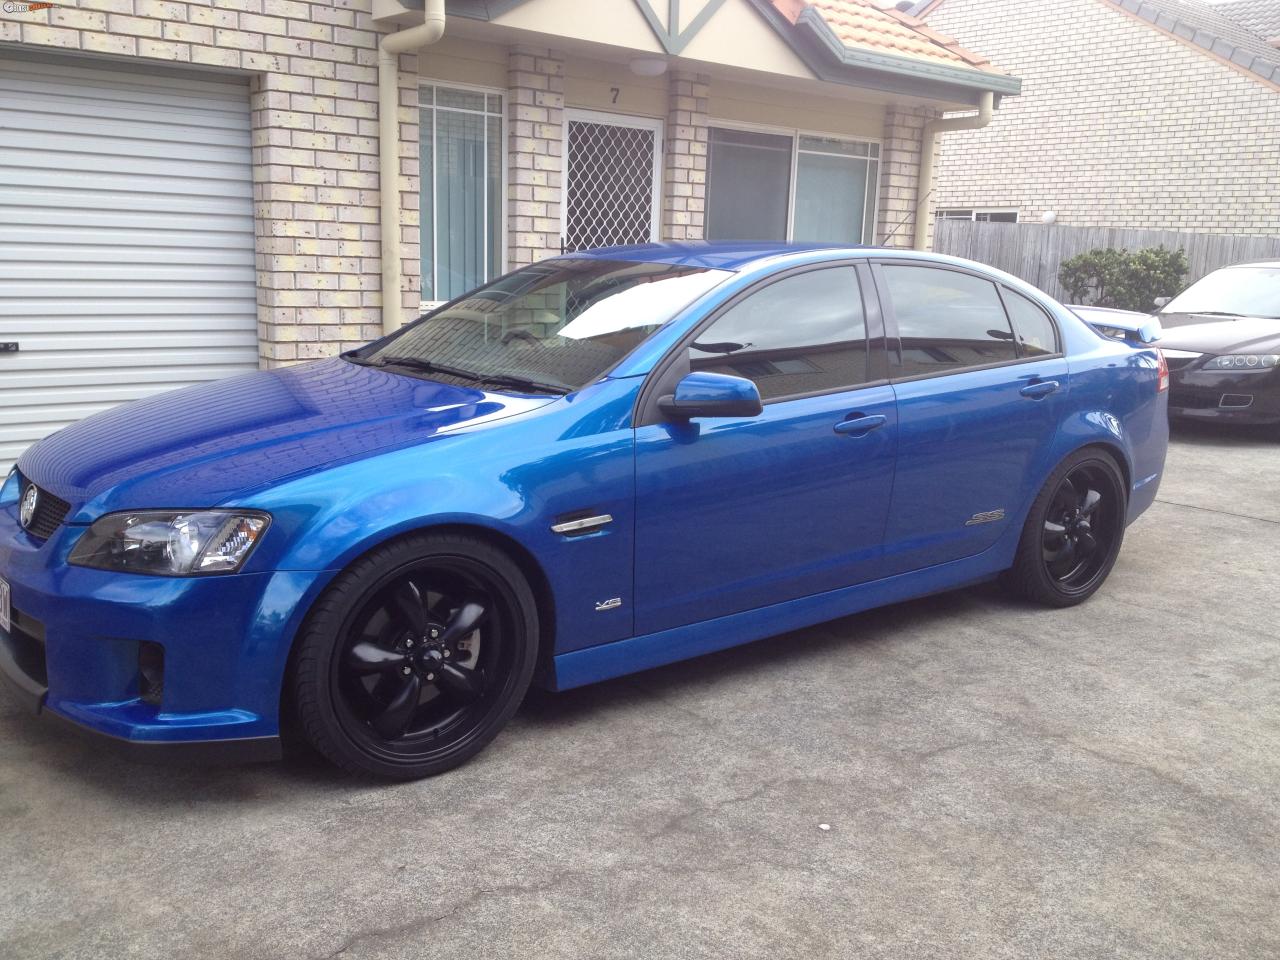 2001 Holden Commodore Vx Ss